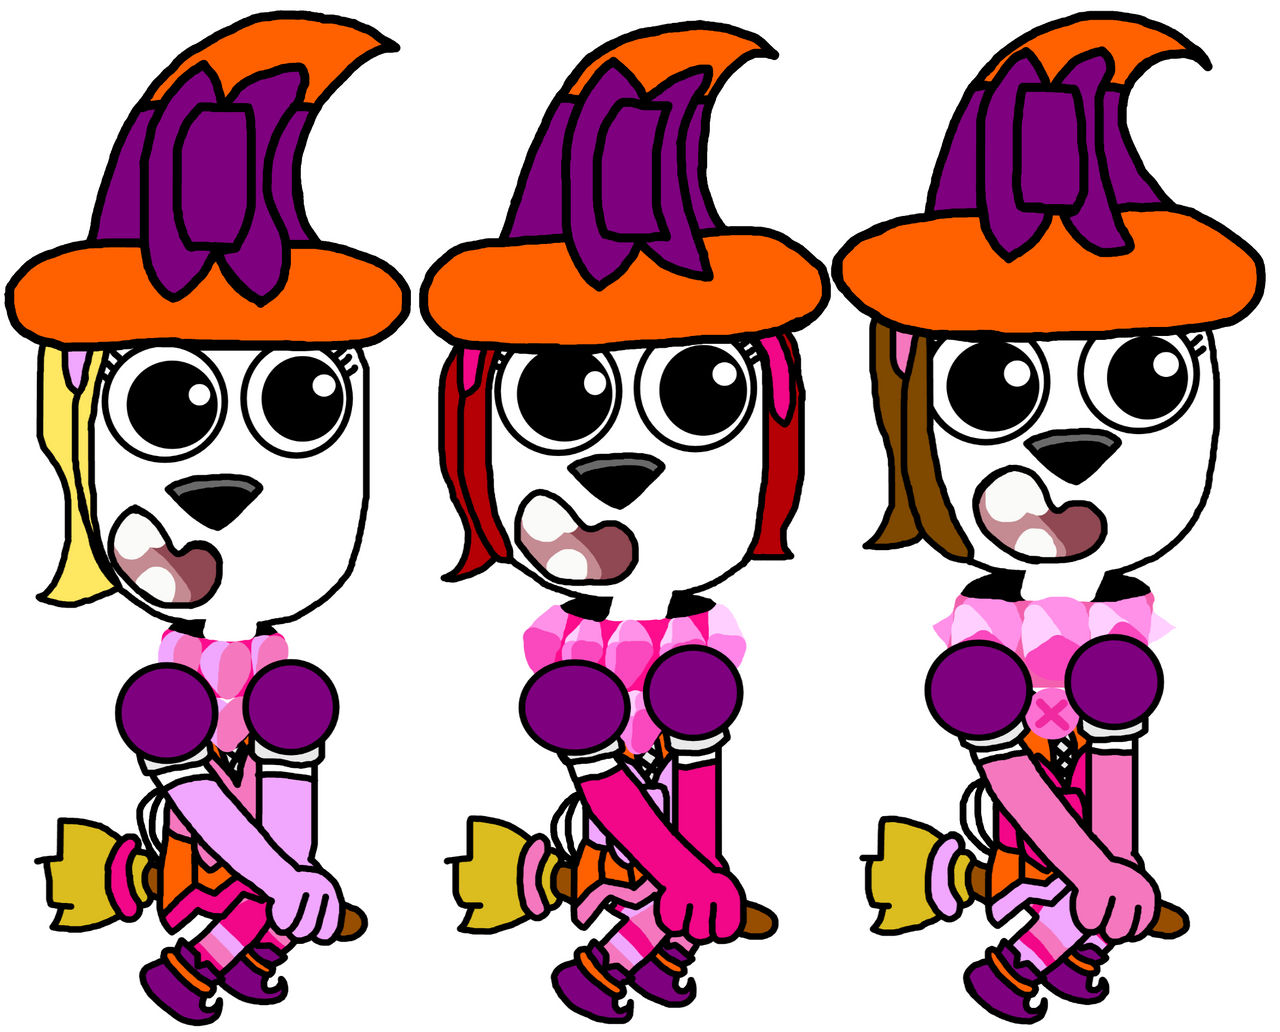 Triple D Dalmatian in Witch Costumes by PaintRubber38 on DeviantArt